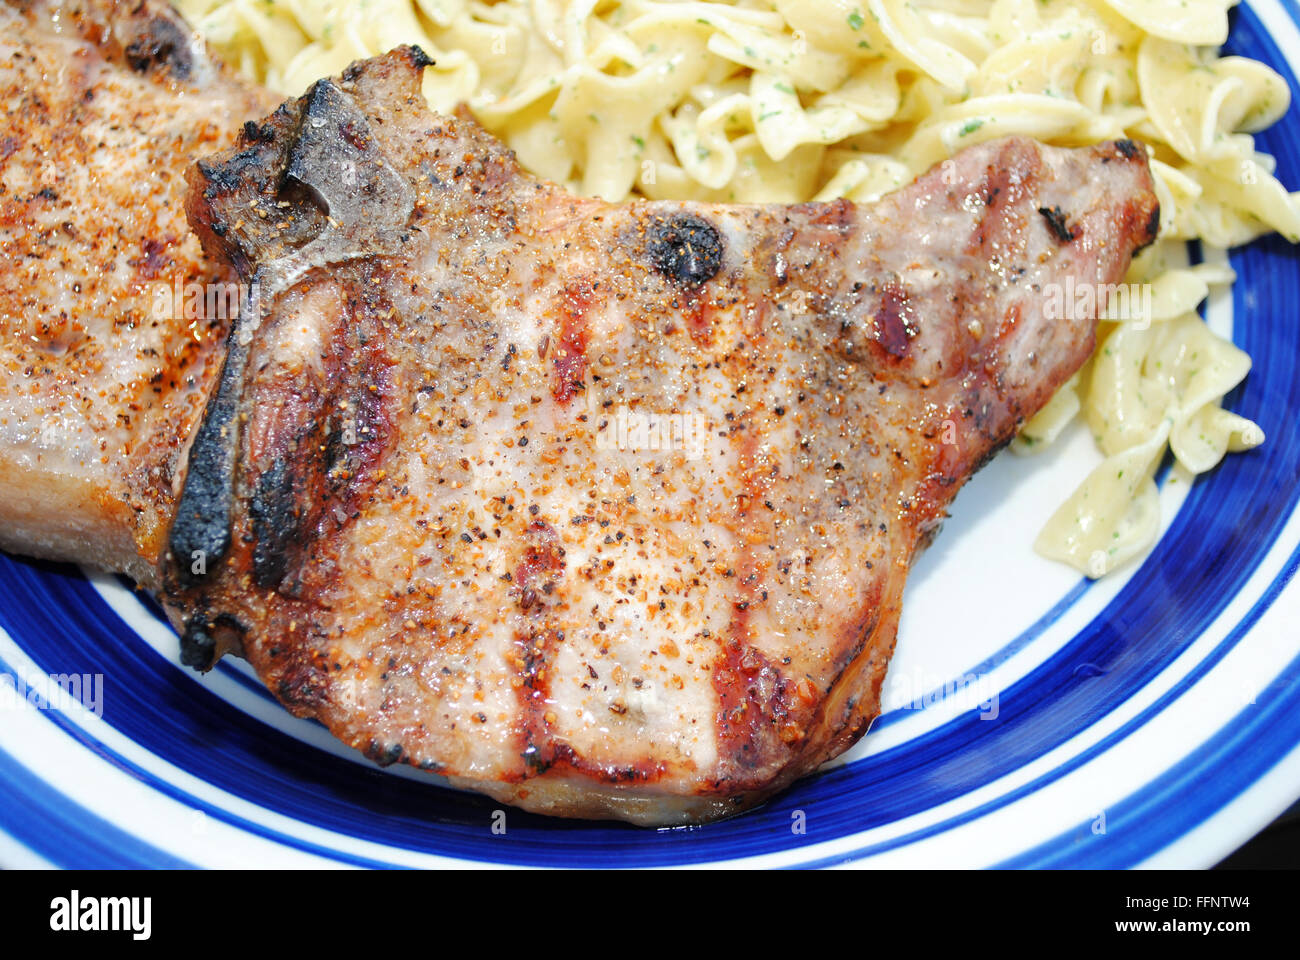 A Served Grilled Pork Chop Stock Photo